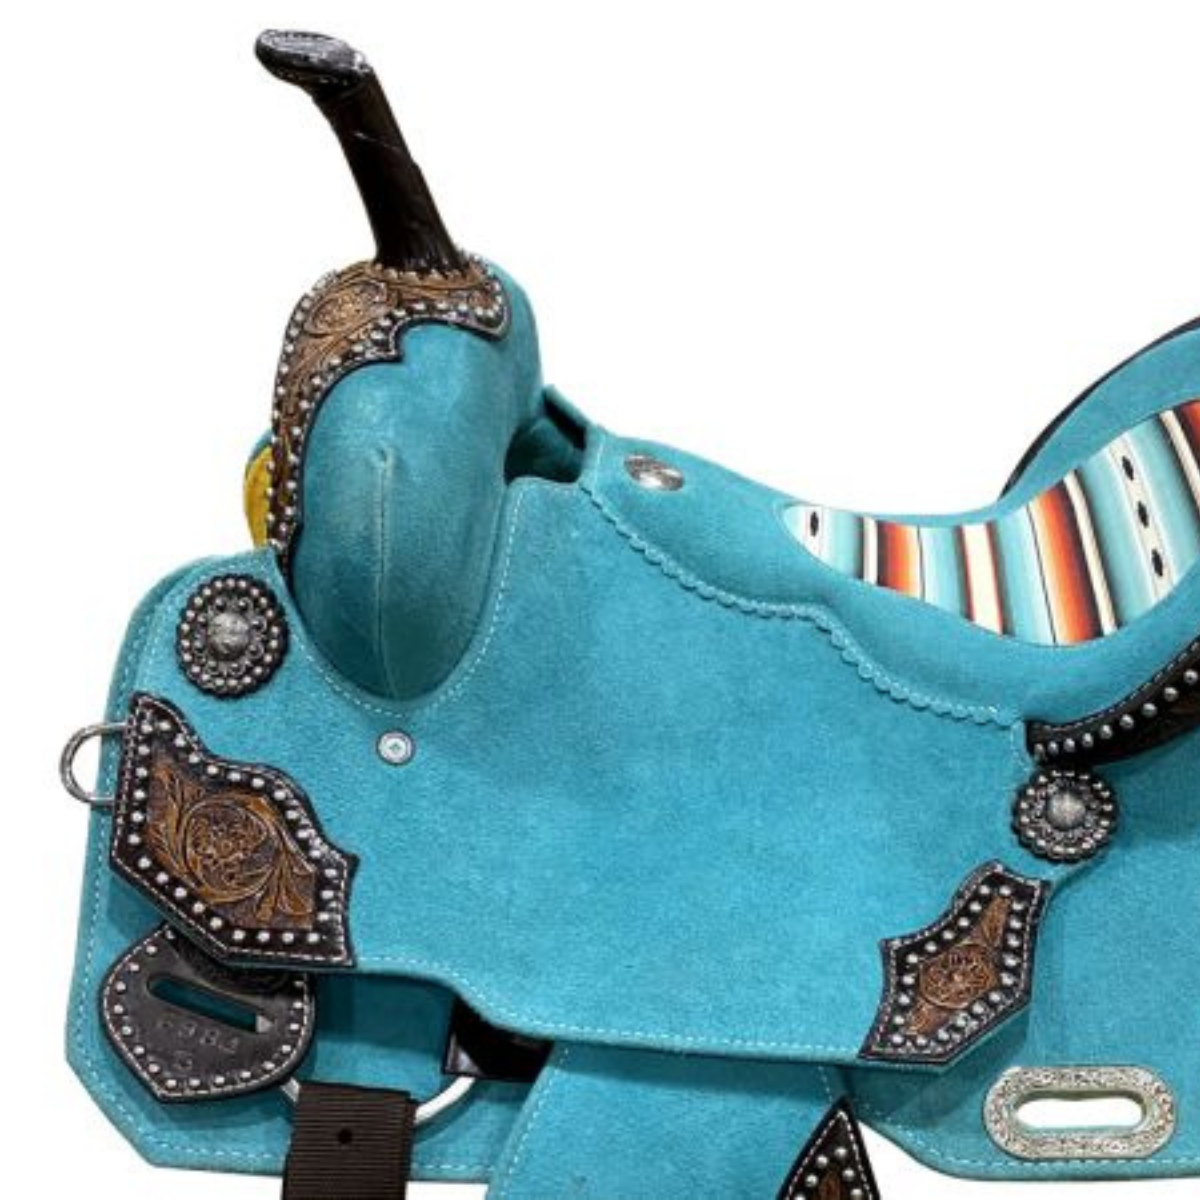 15" DOUBLE T   TEAL ROUGH OUT BARREL STYLE SADDLE WITH SOUTHWEST PRINTED INLAY - Double T Saddles